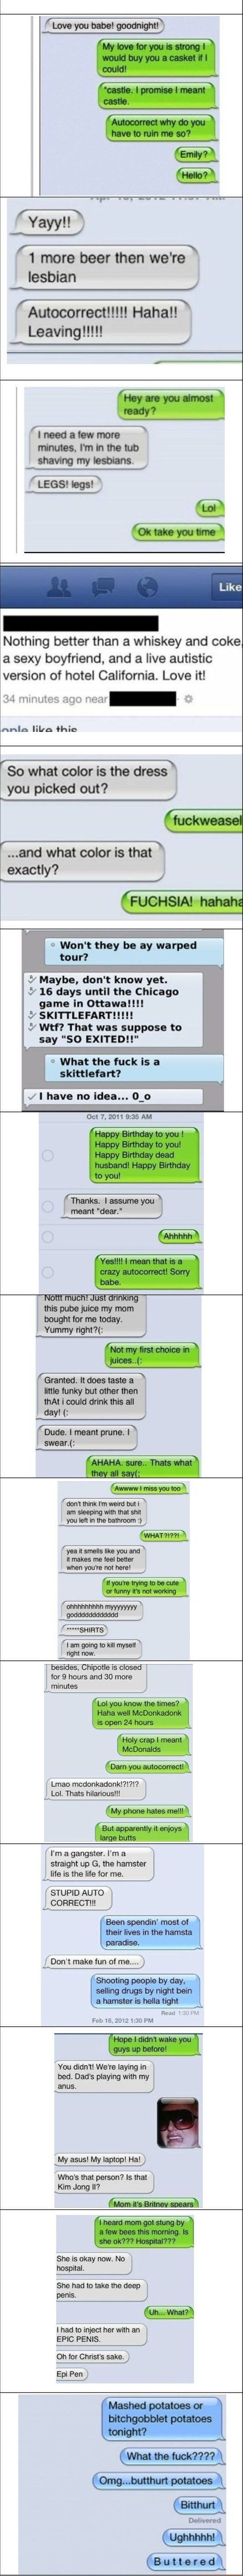 funny-picture-autocorrect-fail-compilation